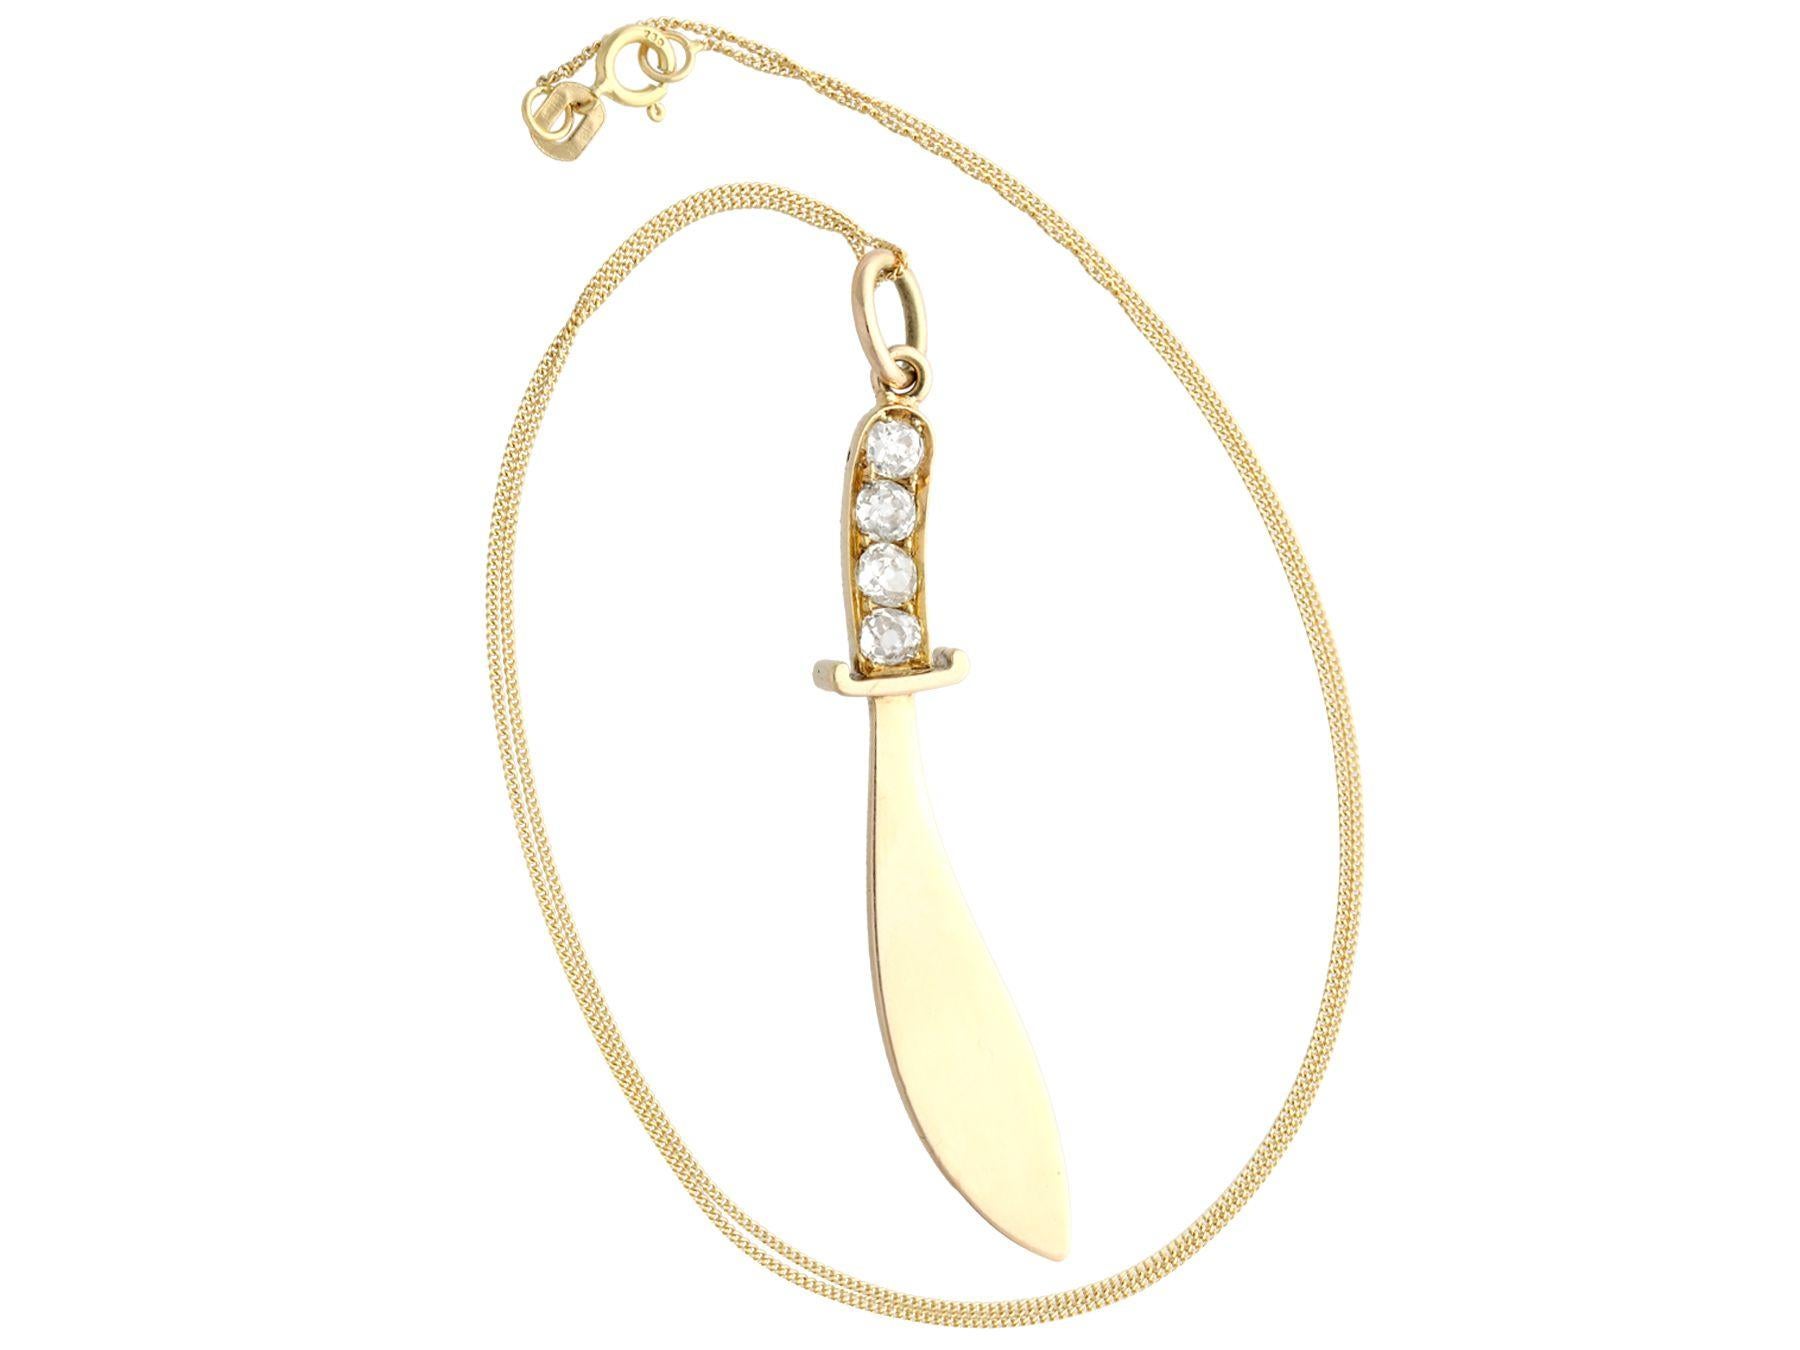 A fine and impressive 0.88 carat diamond and 14k yellow gold pendant in the form of a sword; part of our diverse antique jewelry and estate jewelry collections.

This fine and impressive gold pendant has been crafted in 14k yellow gold.

The pendant